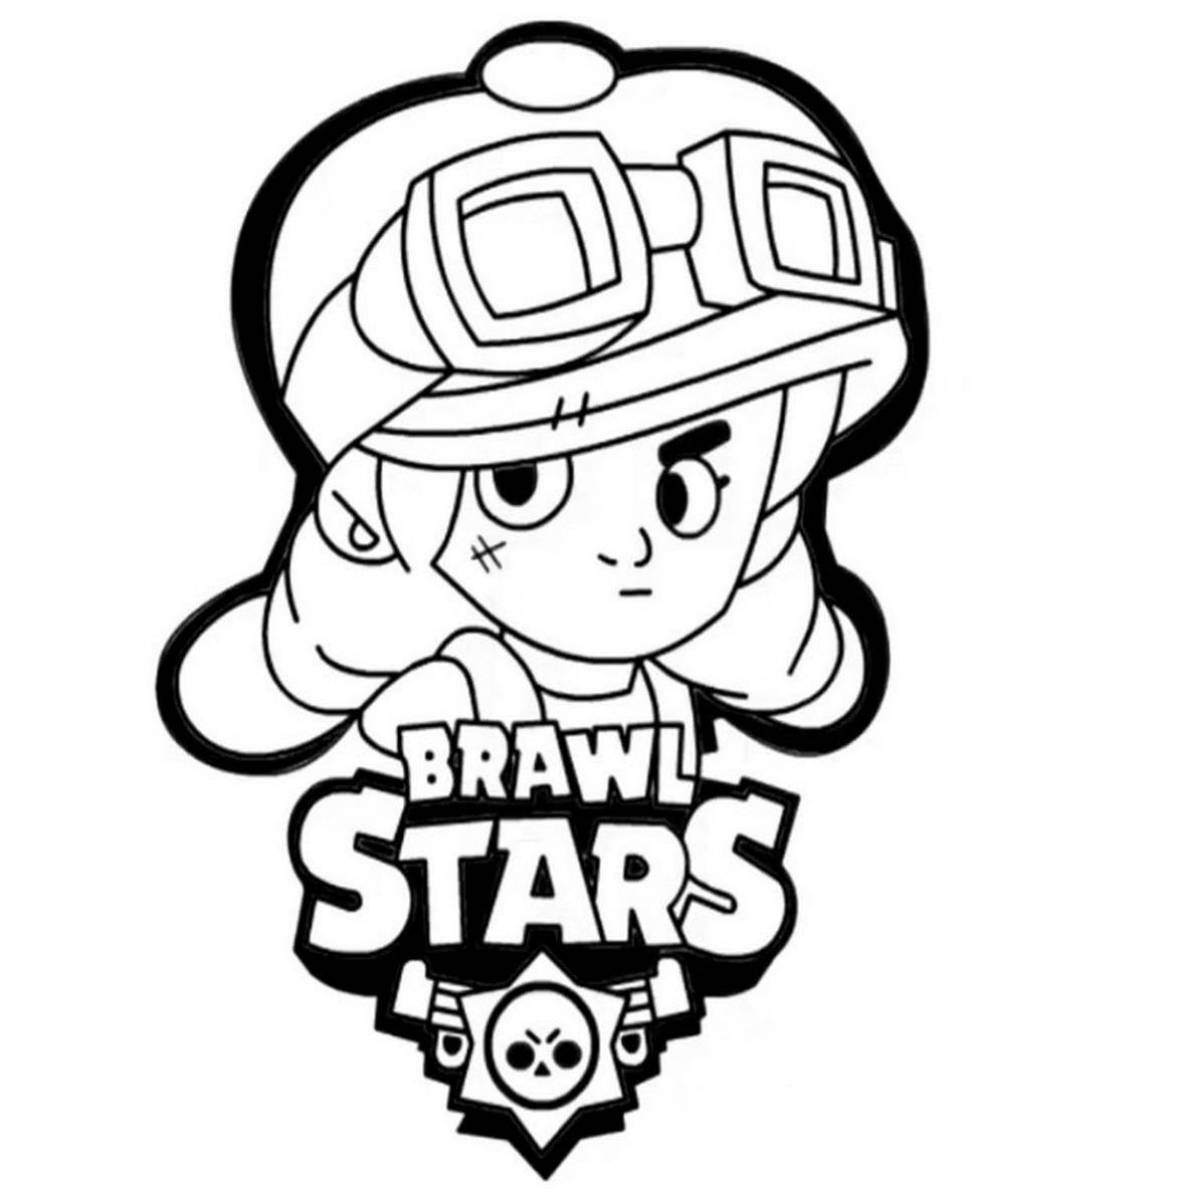 Brawl stars colorful sprout coloring book